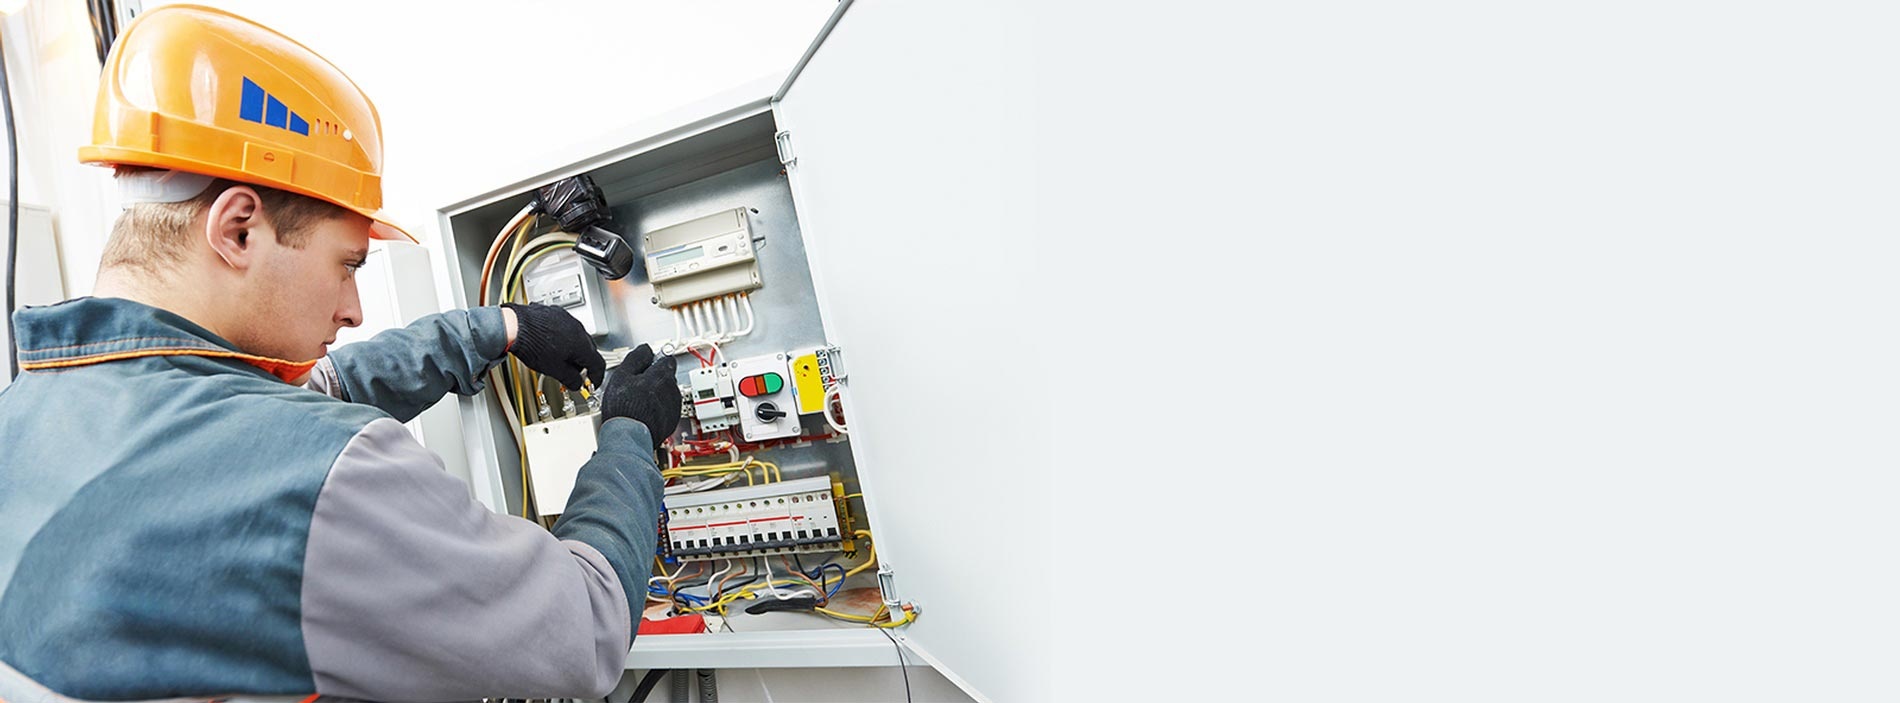 CarmTech Electric Ltd will provide you with services in all aspects of Electrical Work across GTA